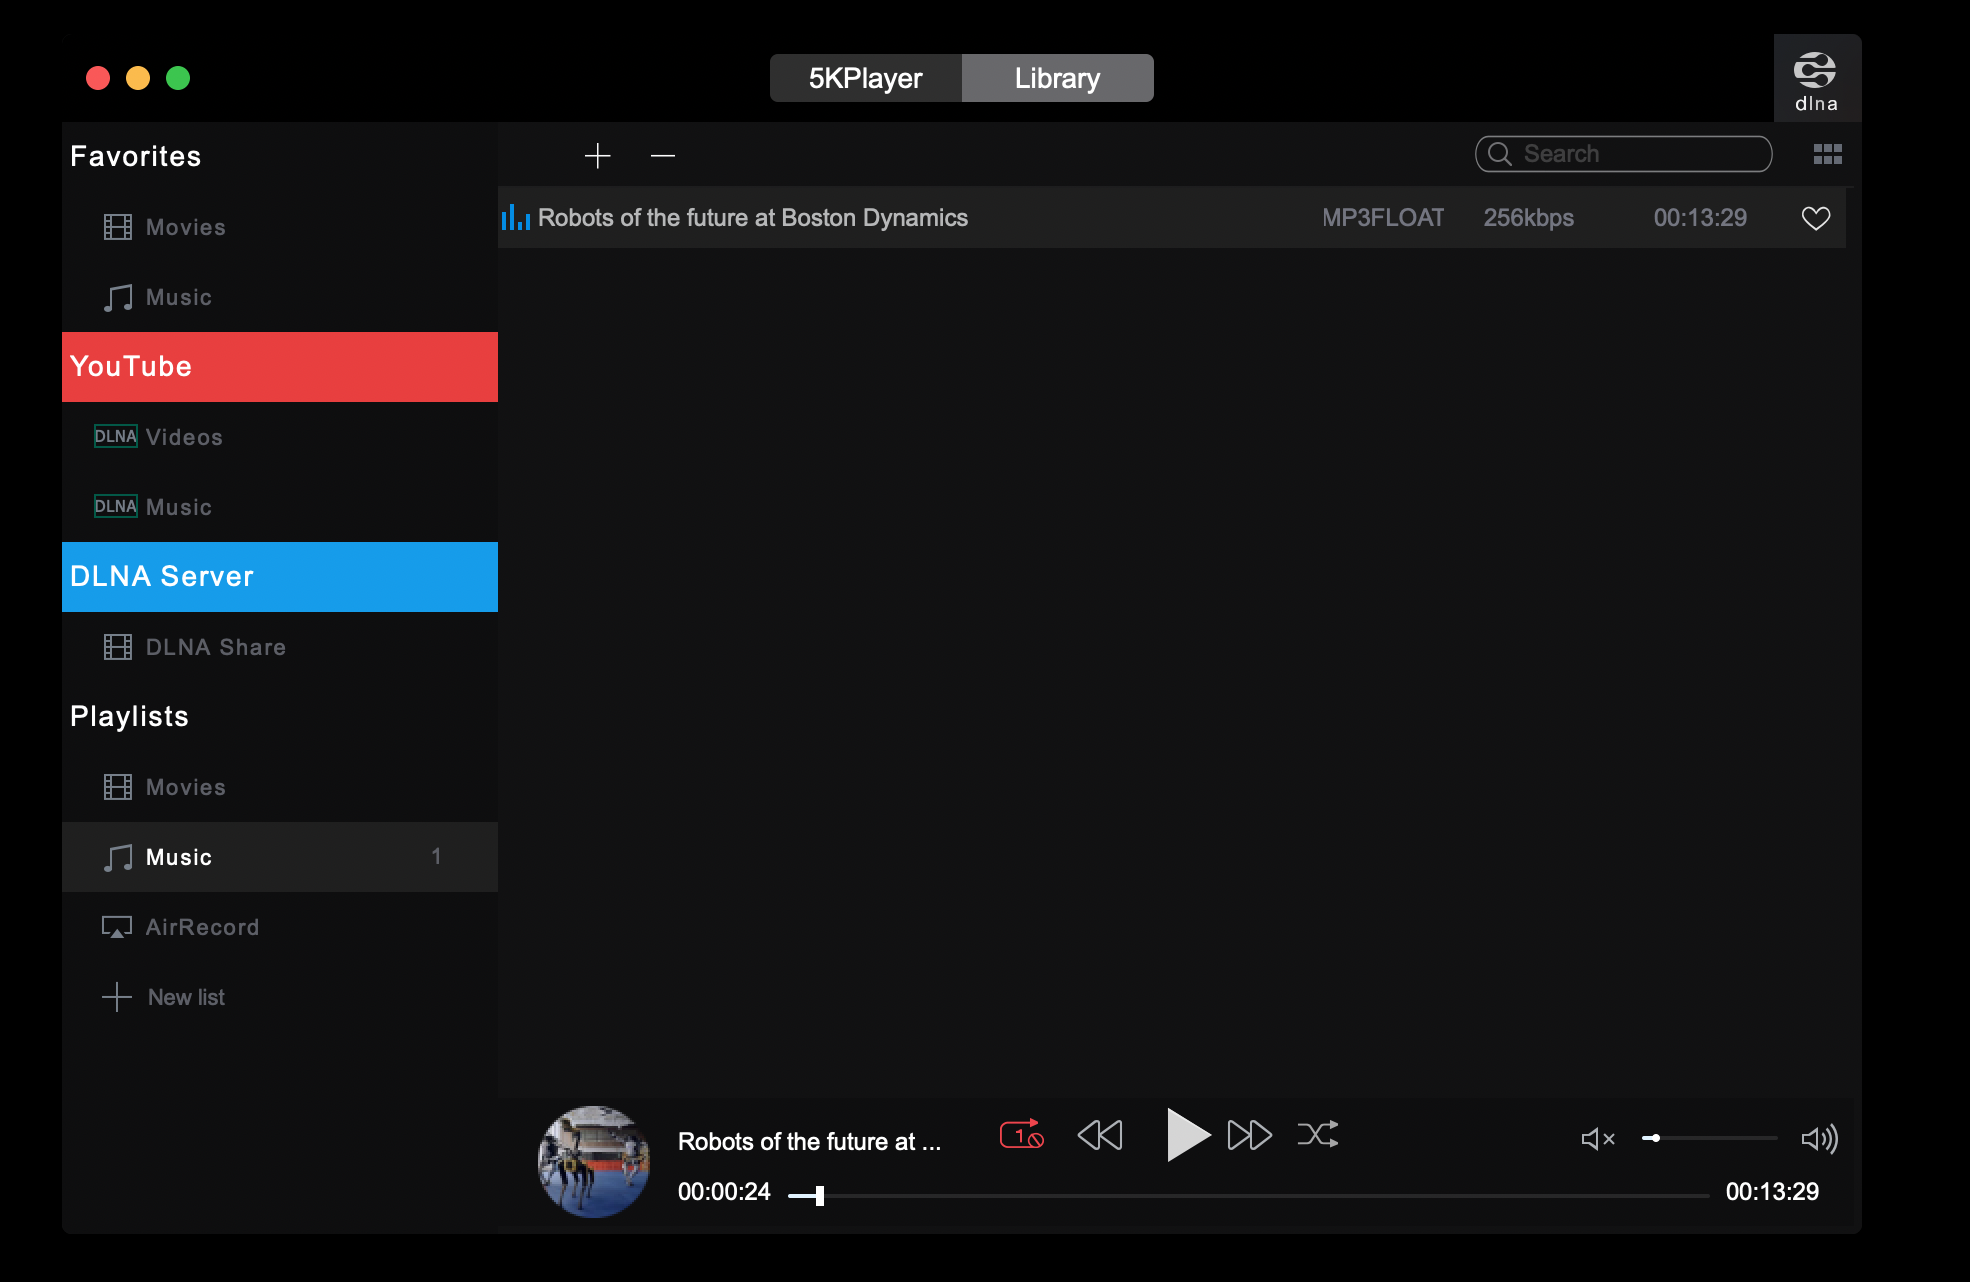 best music player for mac free download